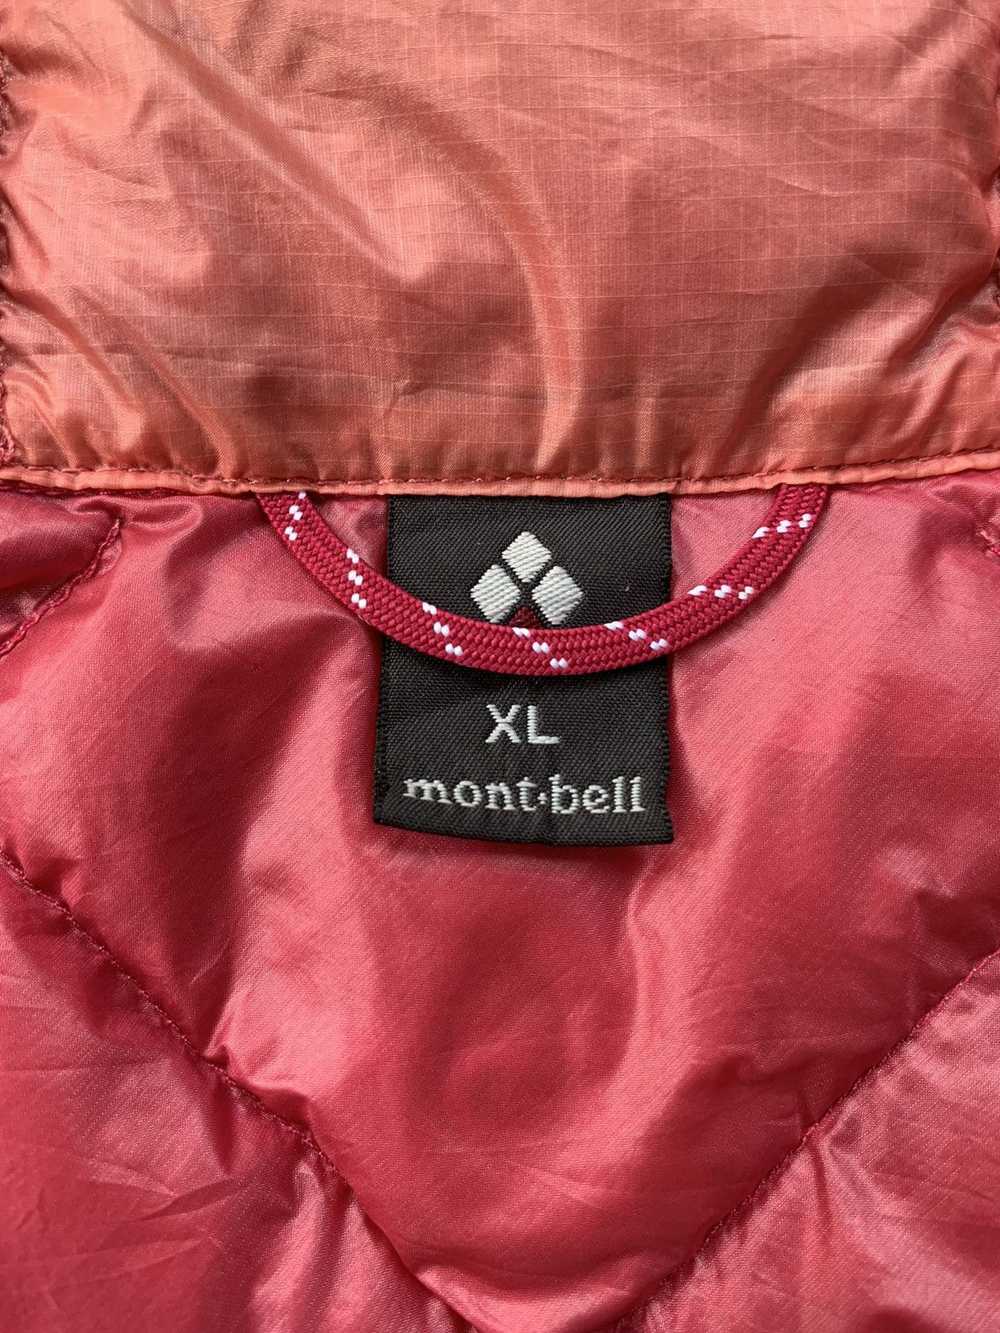 Montbell 2000s Diamond Lightweight Down Jacket - image 4